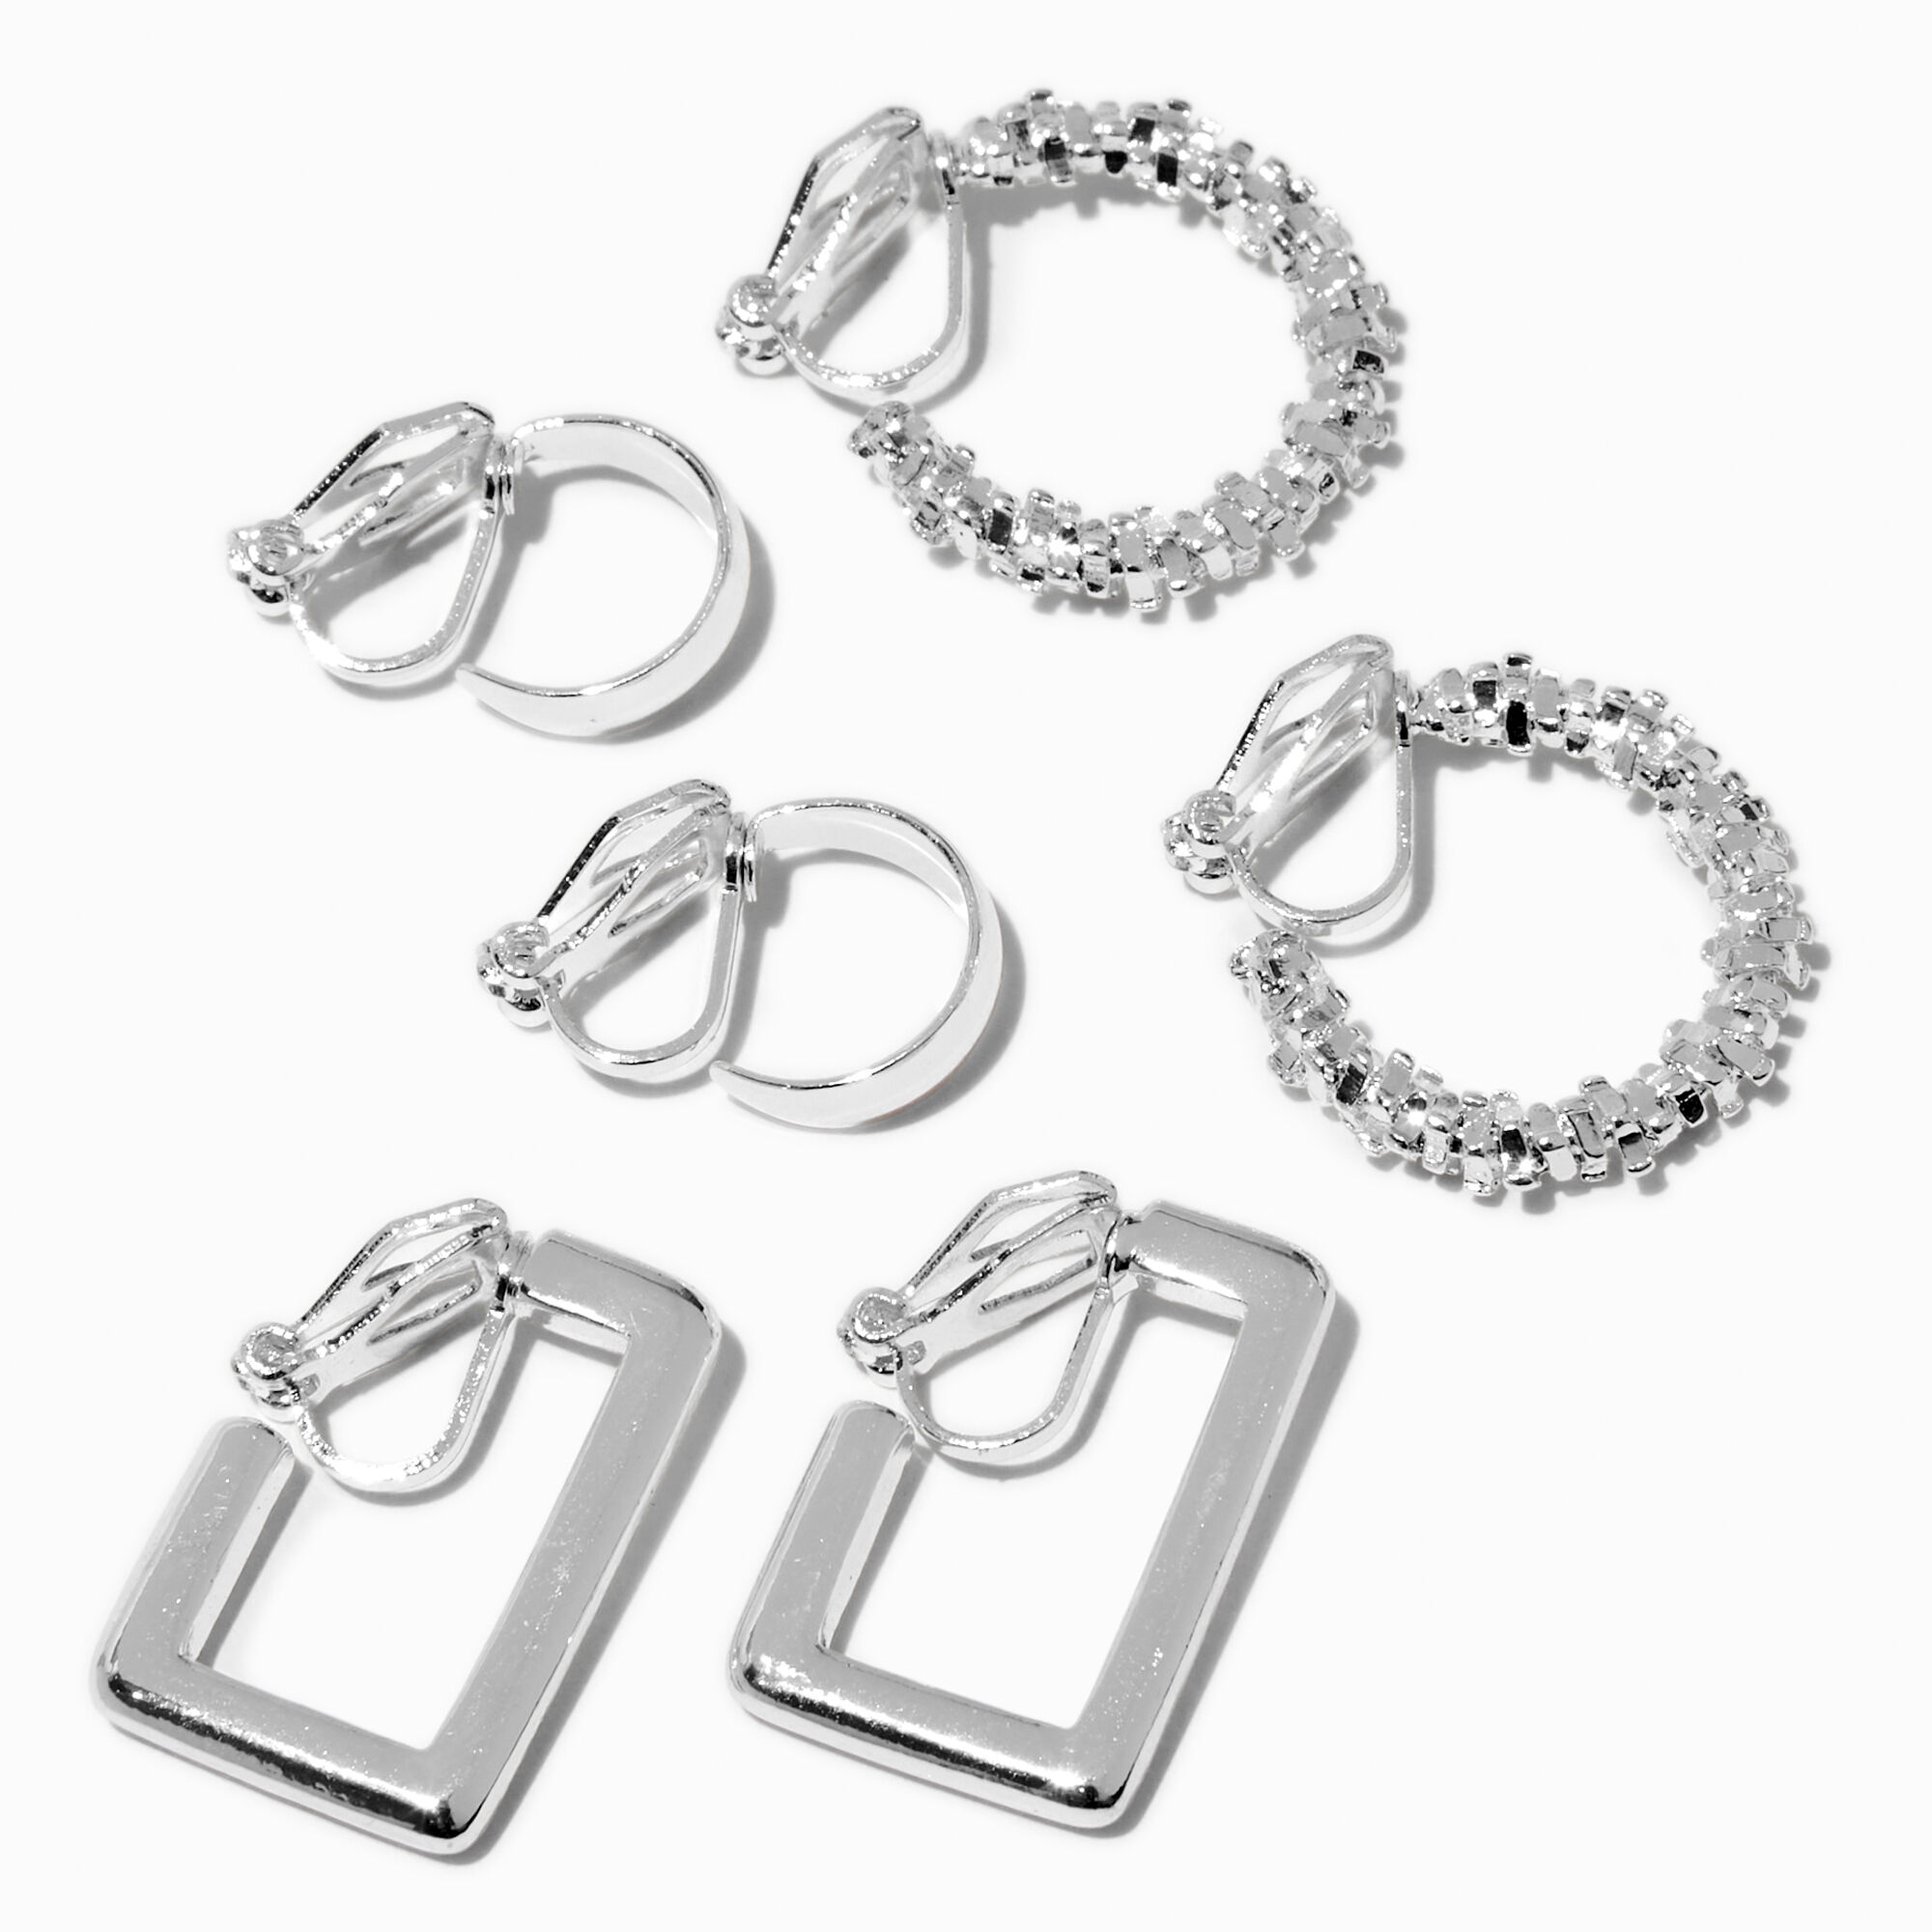 View Claires Tone Crystal Geometric ClipOn Hoop Earrings 3 Pack Silver information